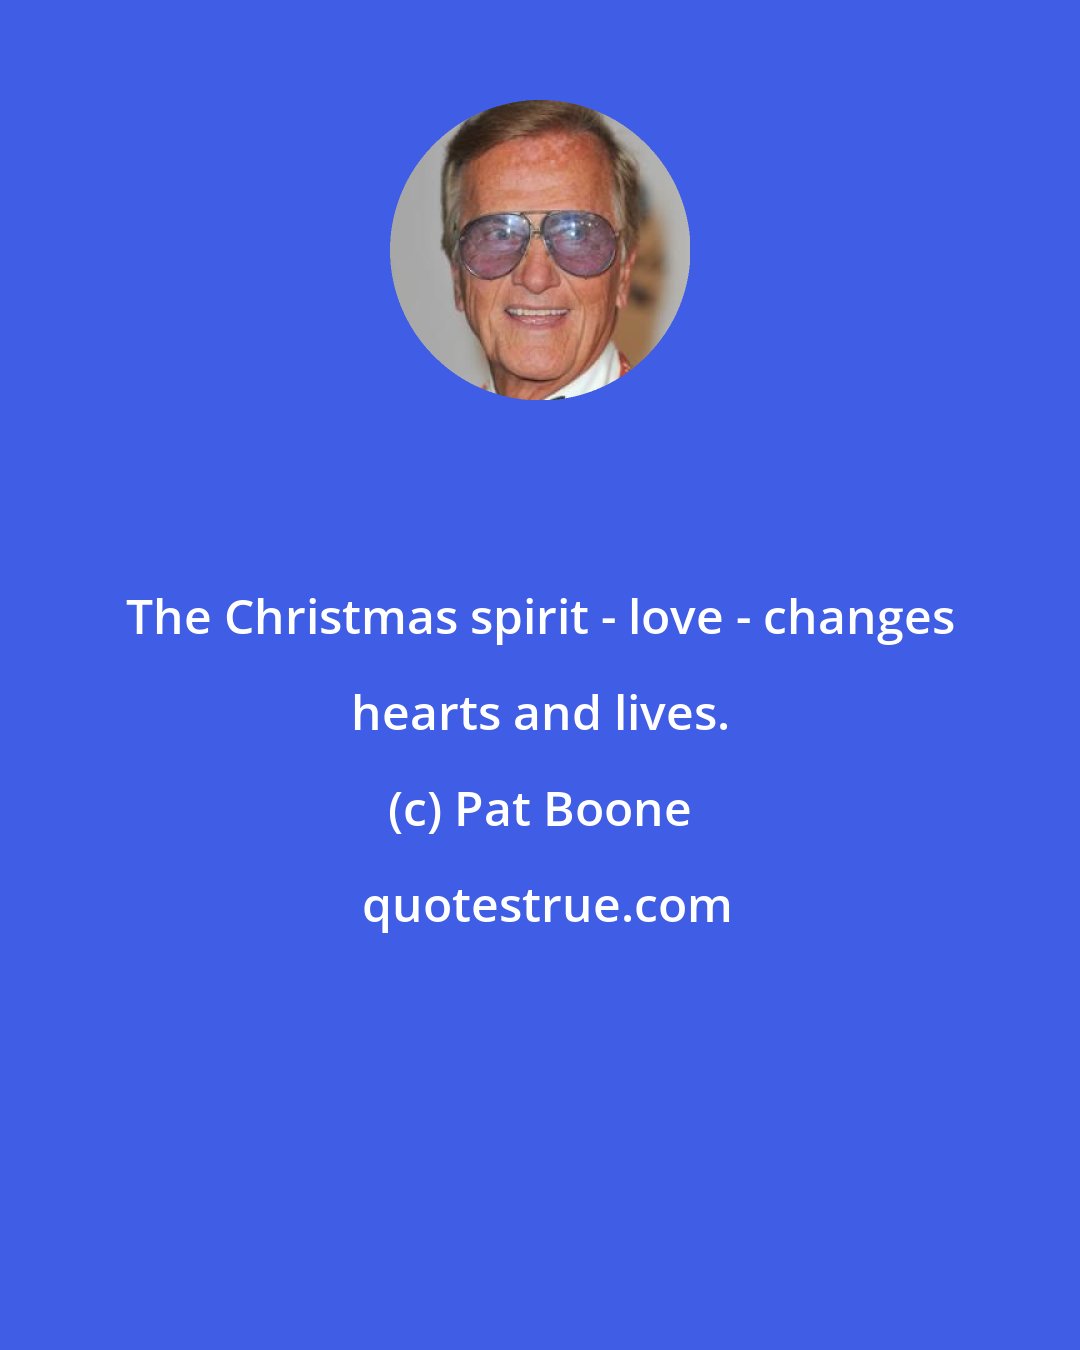 Pat Boone: The Christmas spirit - love - changes hearts and lives.